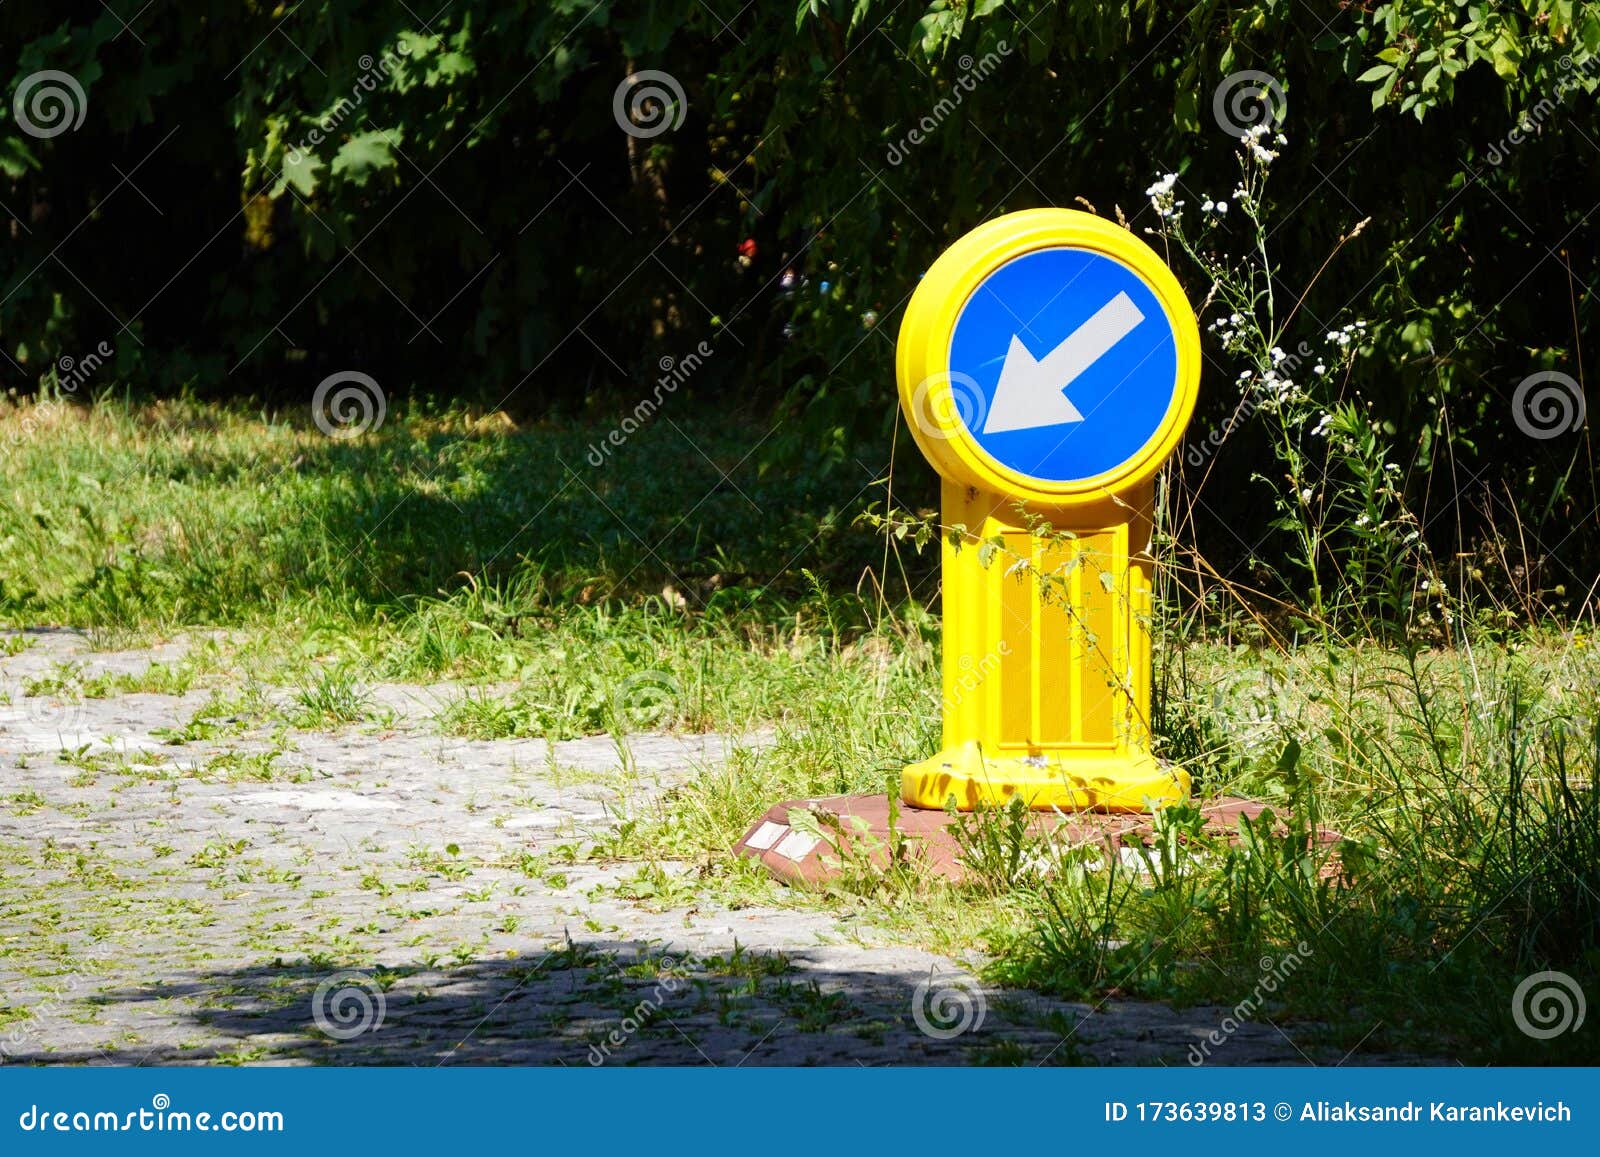 Road Sign by the Road, White Arrow on Blue Background, Driving ...